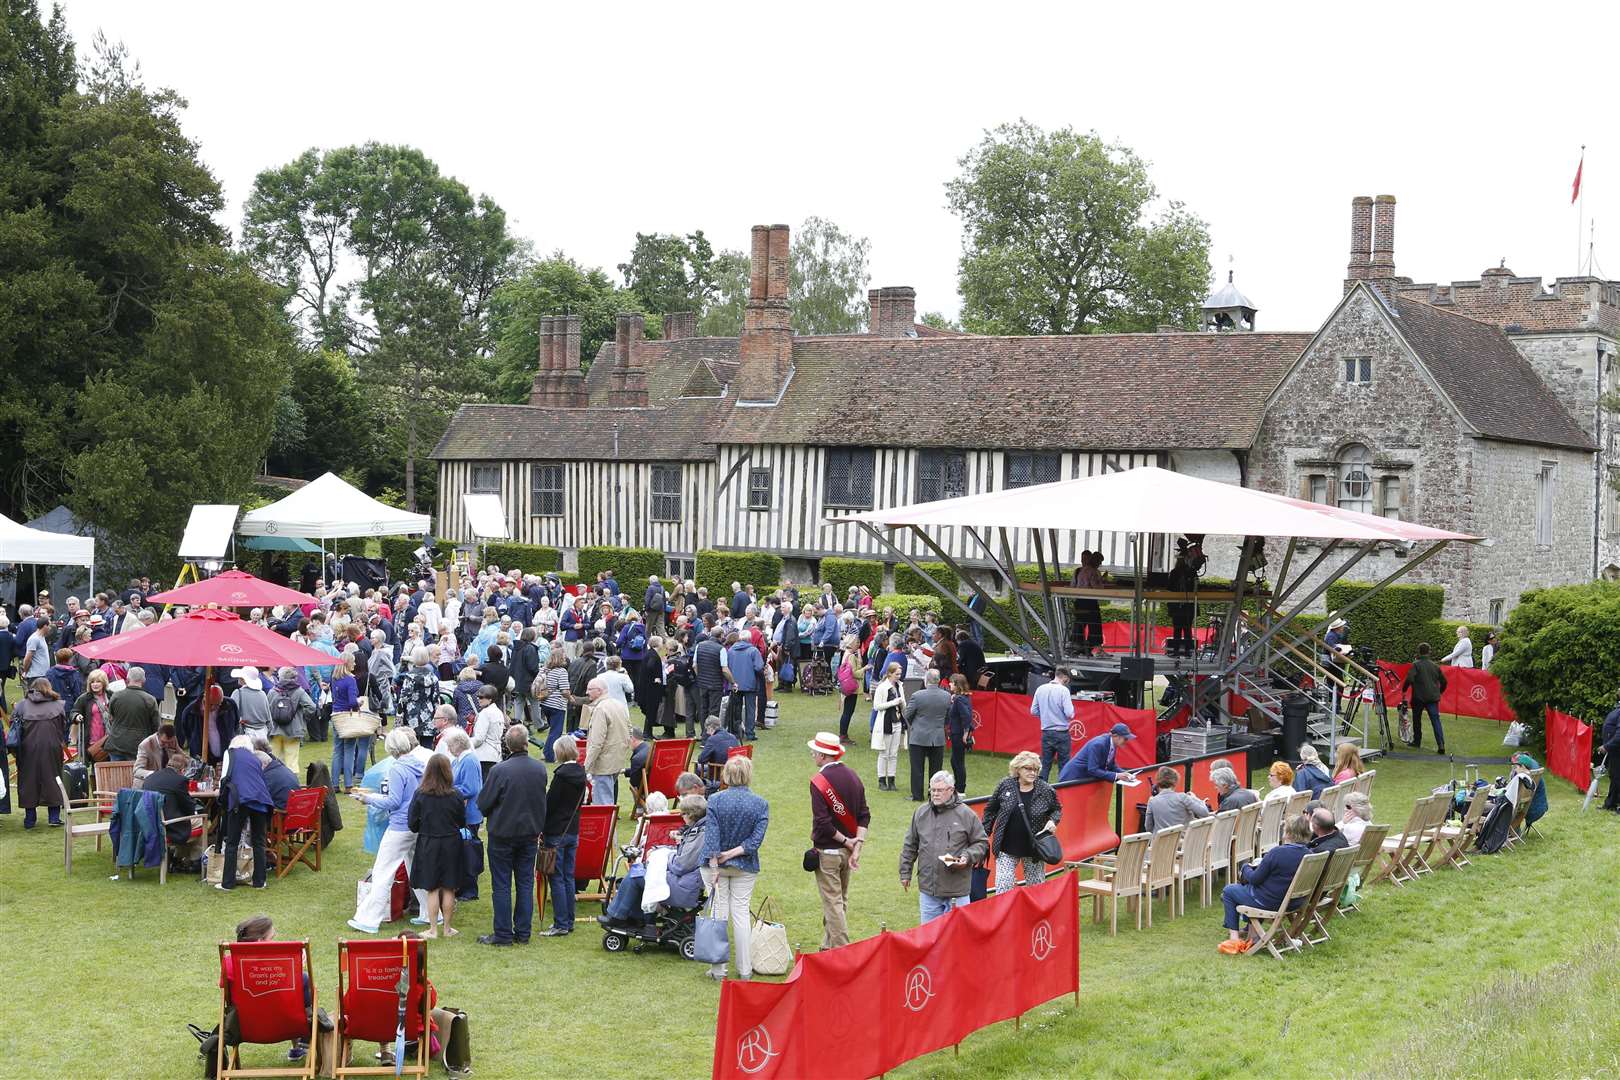 The show visited Ightham Mote in 2016